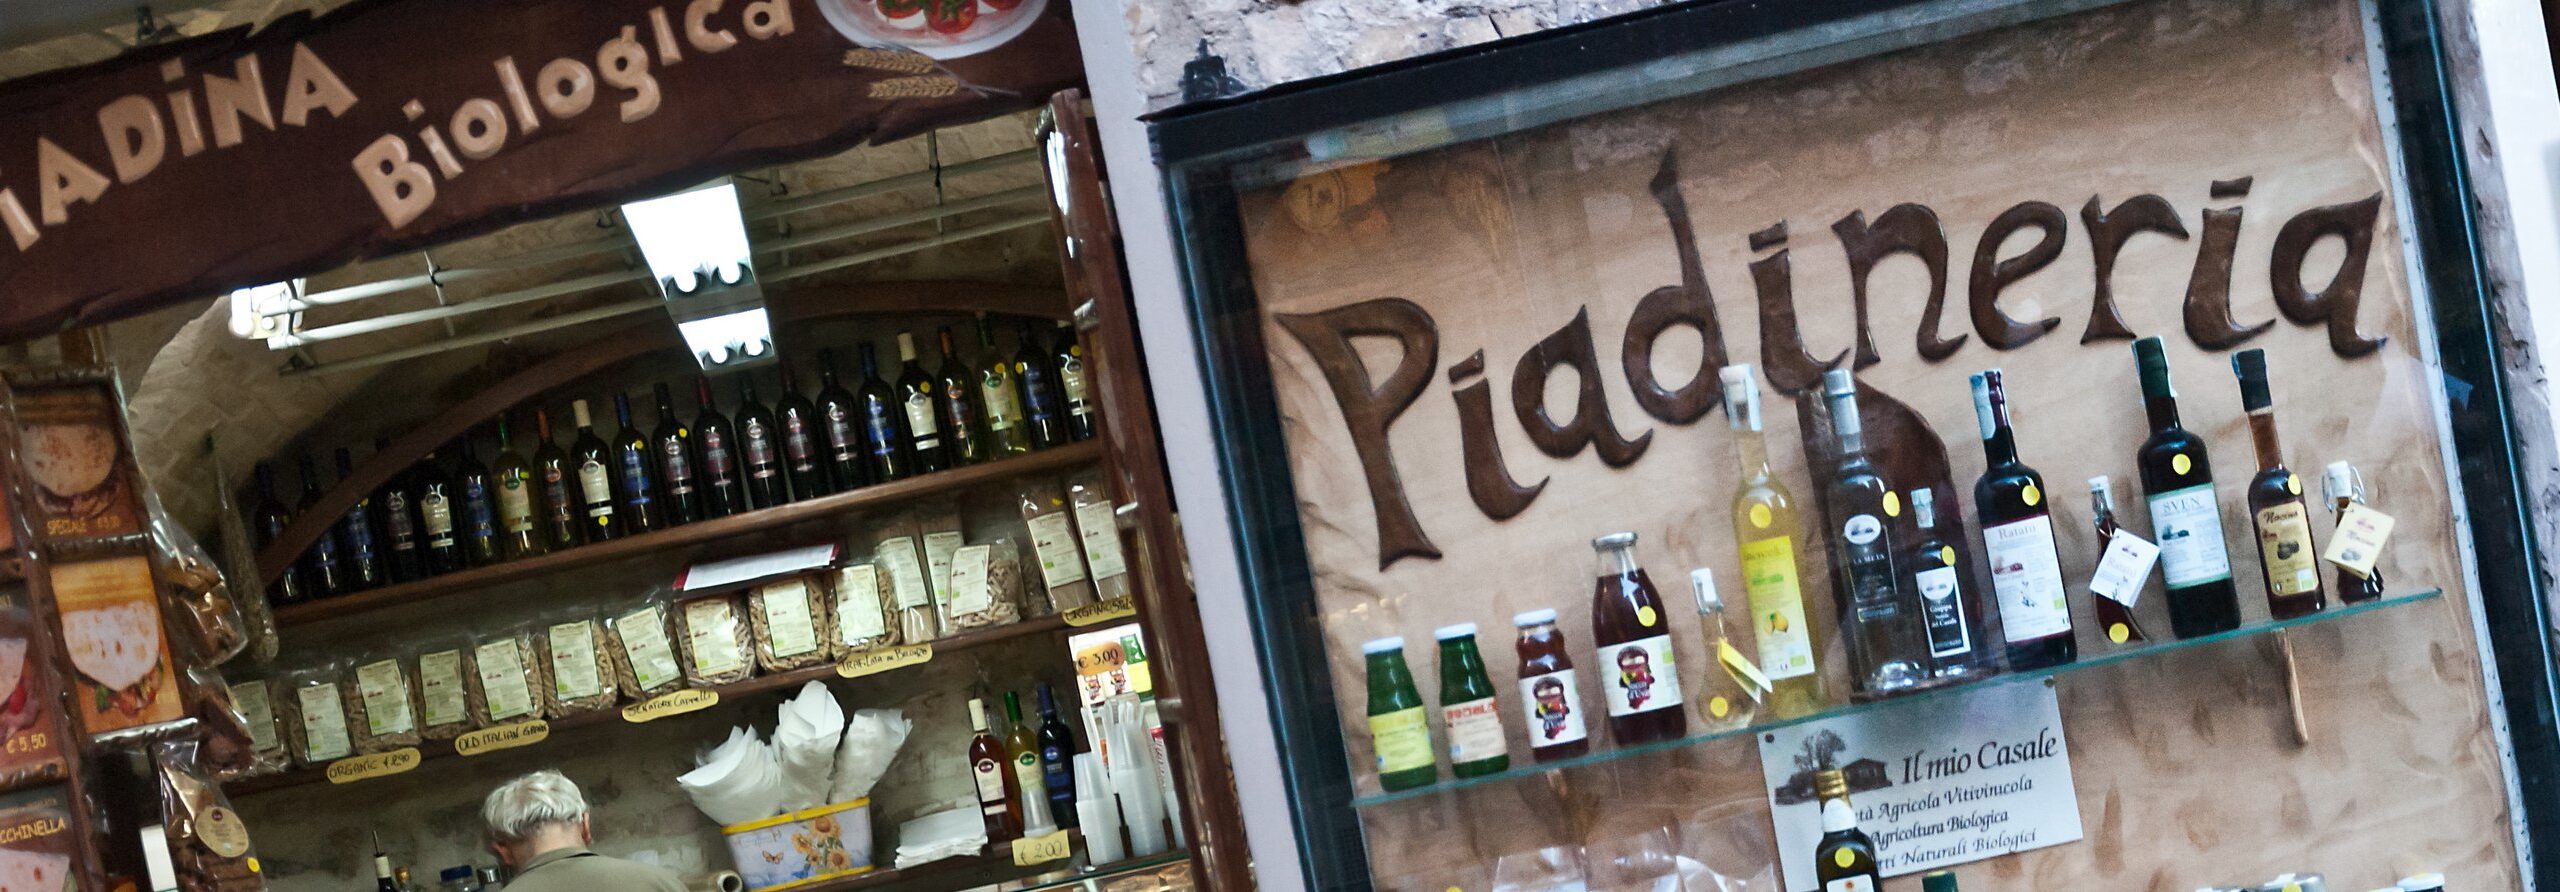 Stop in after a bike ride to purchase some local goods from a local Piadineria in Italy